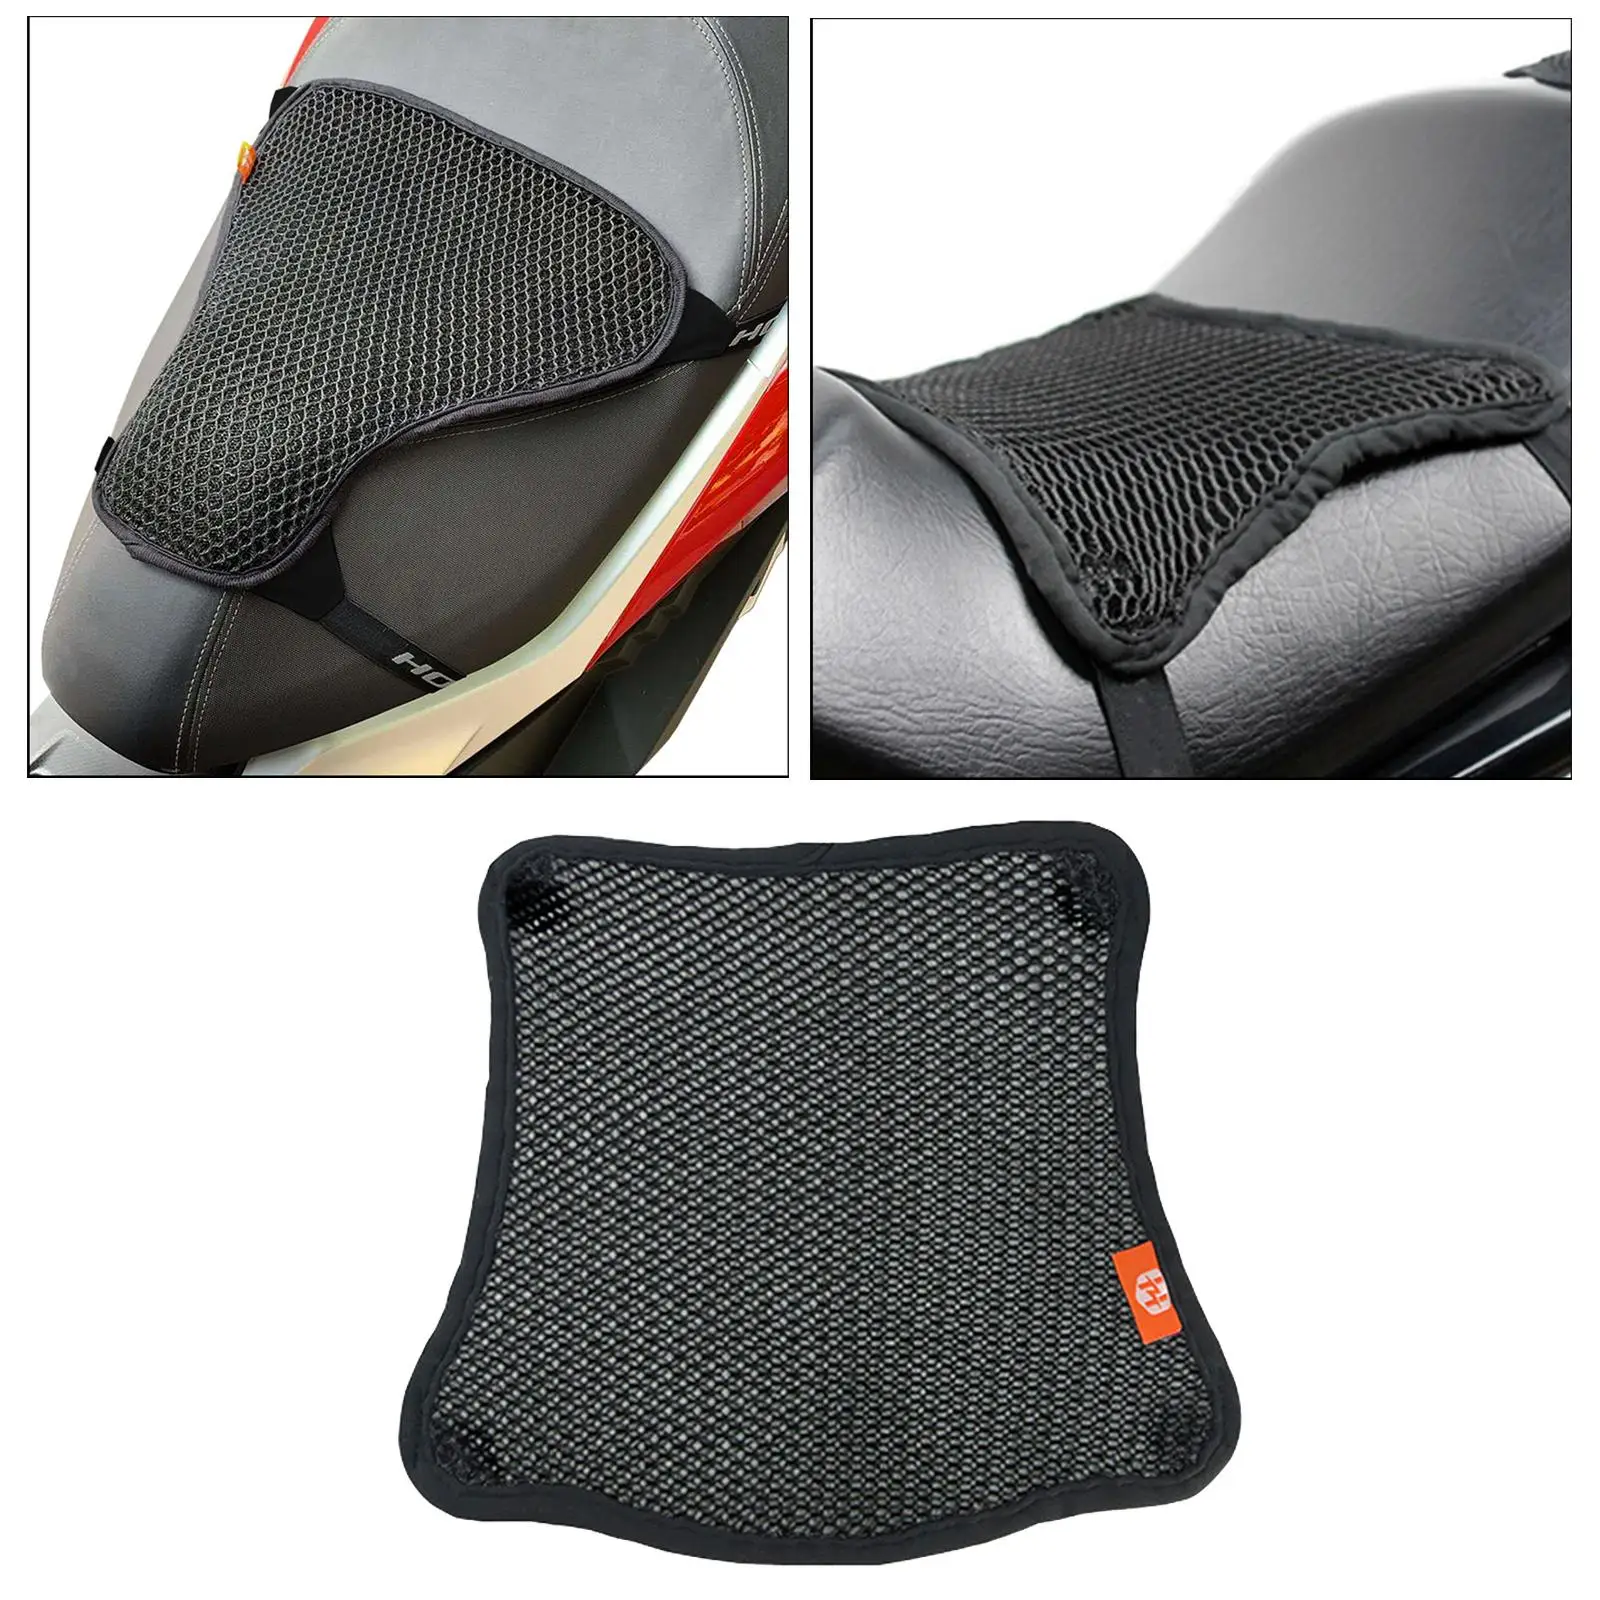 Motorcycle Seat Cushion Breathable Reduces Pressure and Fatigue Cruiser